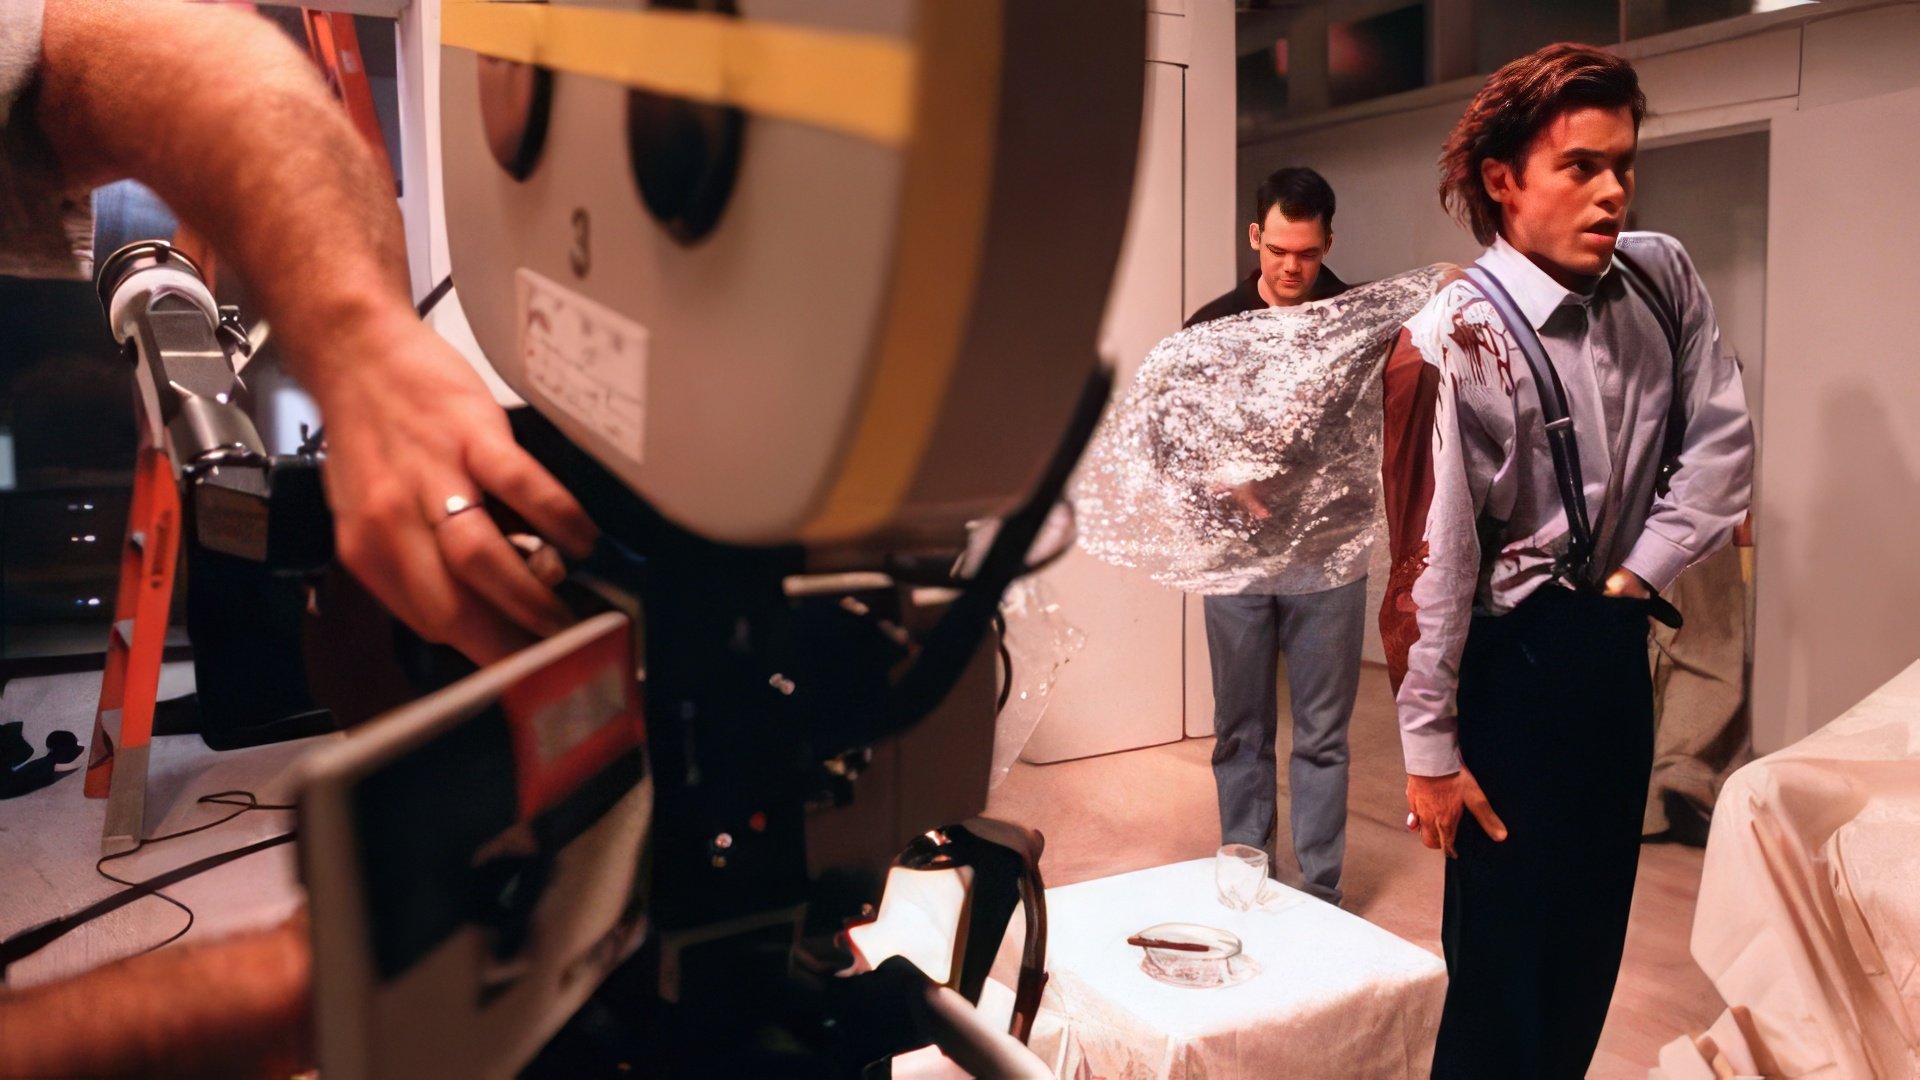 On the set of 'American Psycho'